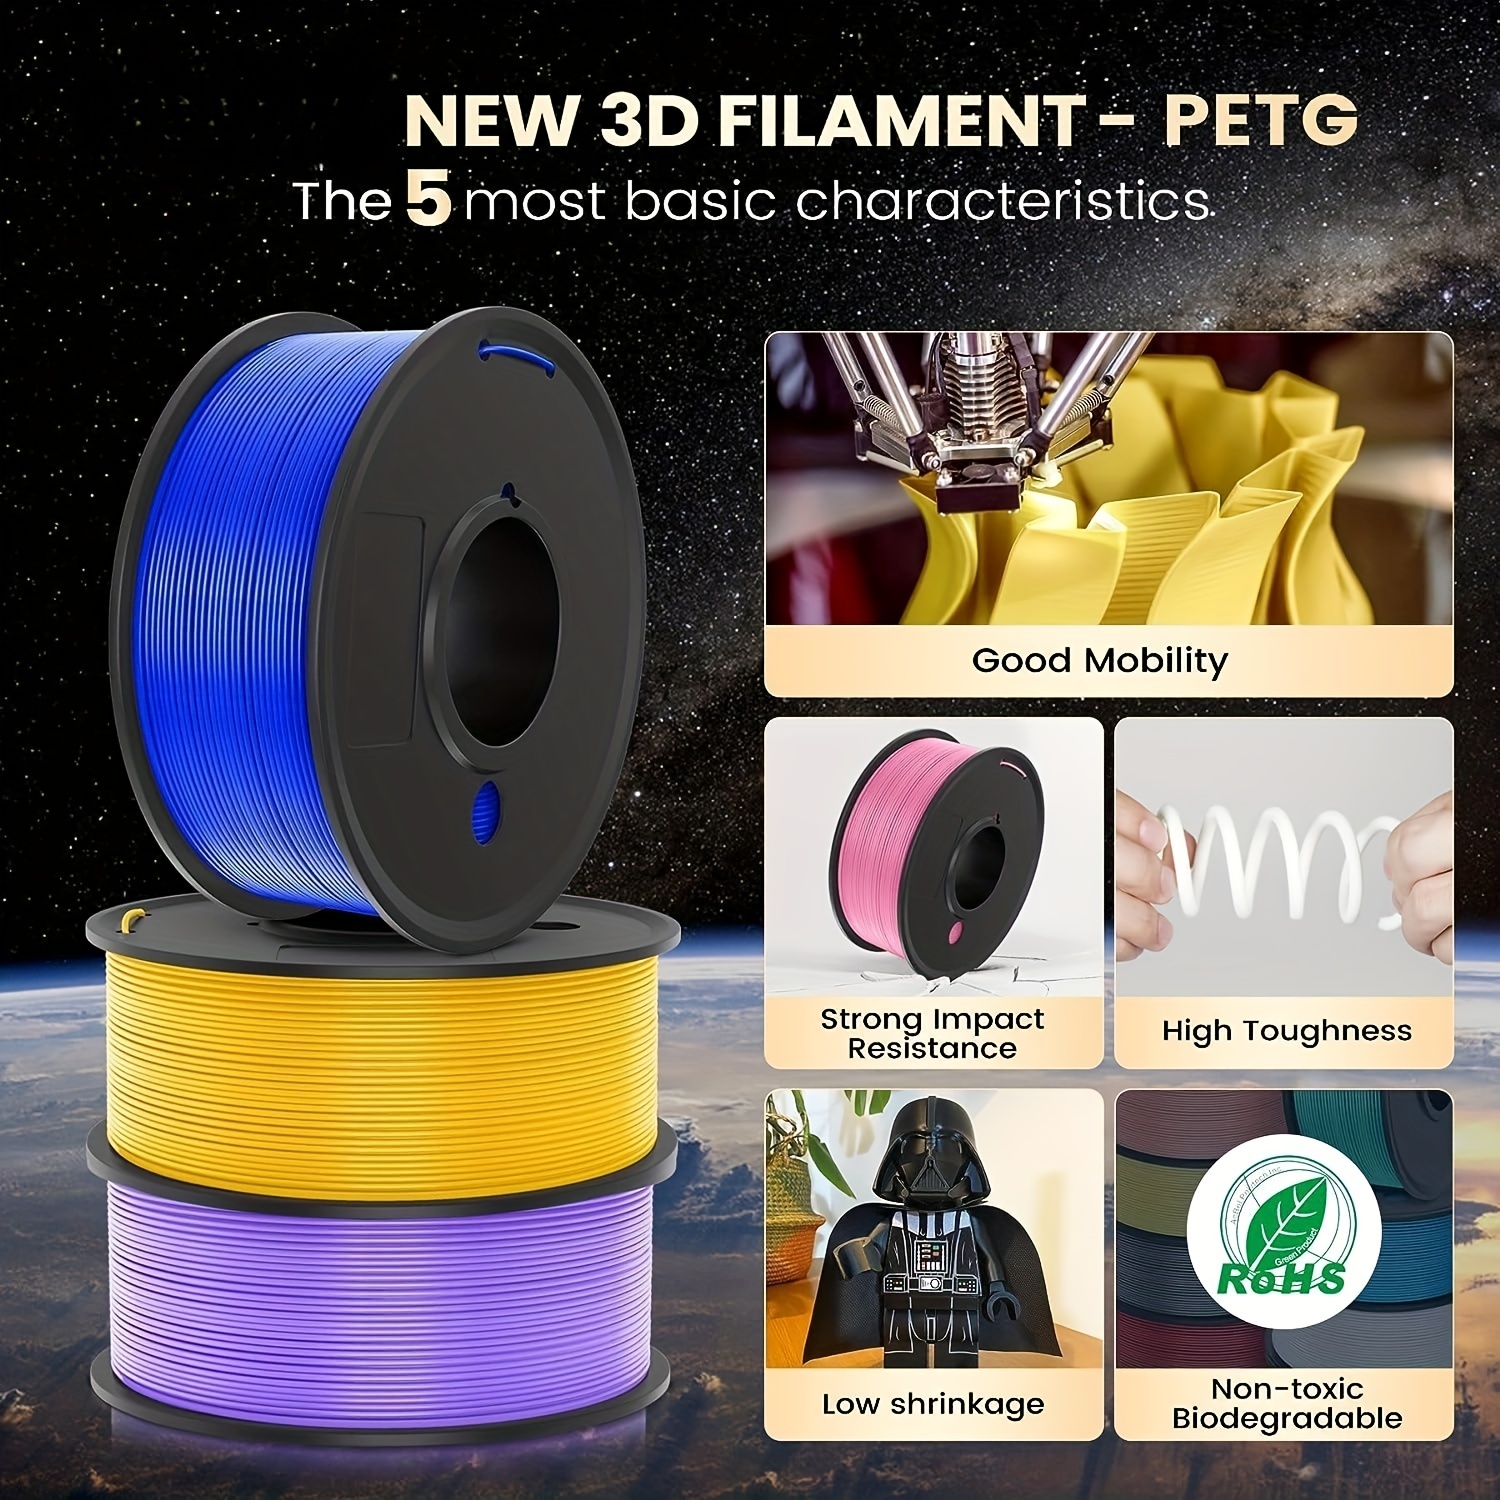 Black Bearing Design 3D Printer Filament Spool Holder Fits All Spools of Any Size and All Filament Types for PLA/ABS/TPU/Other 3D Printing Materials